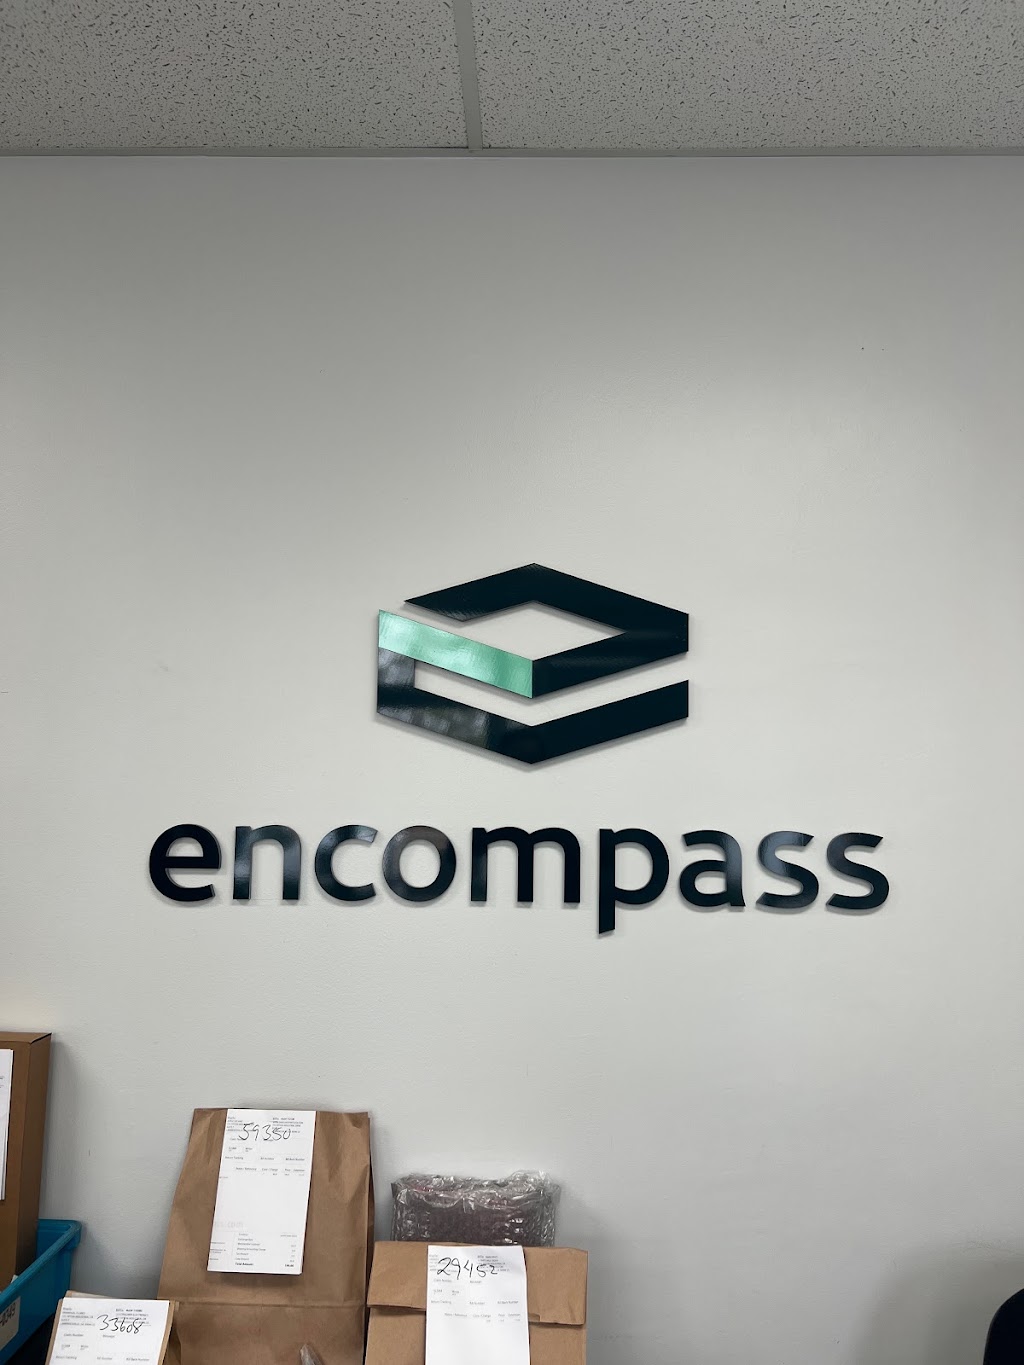 Encompass Supply Chain Solutions, LLC | 775 Tipton Industrial Dr, Lawrenceville, GA 30046 | Phone: (800) 432-8542